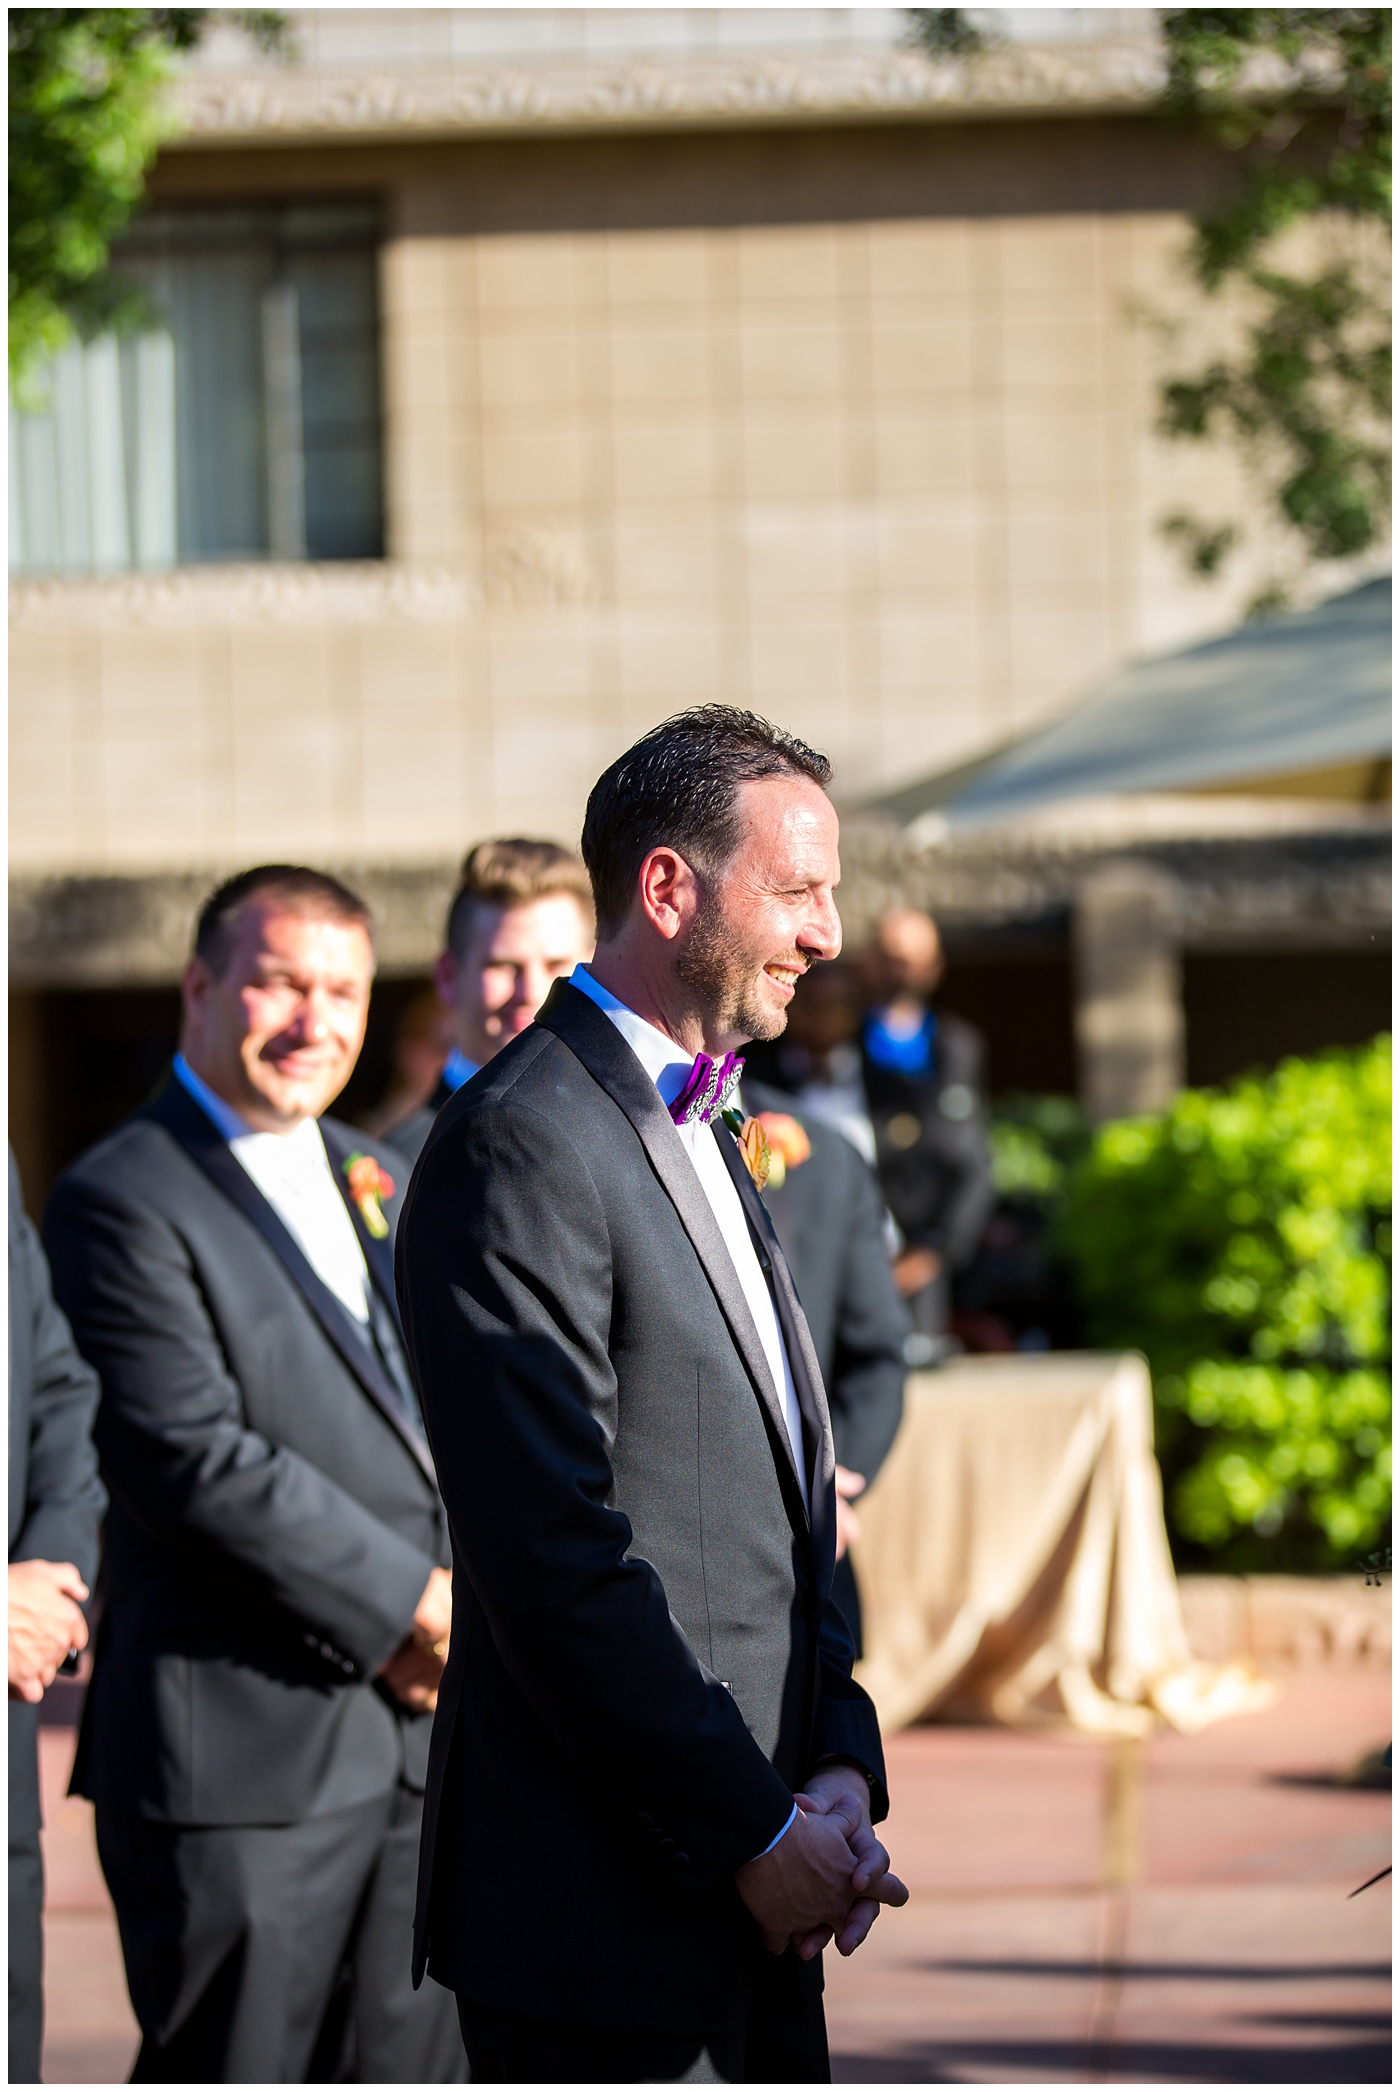 groom seeing bride walk down the aisle at outdoor wedding ceremony